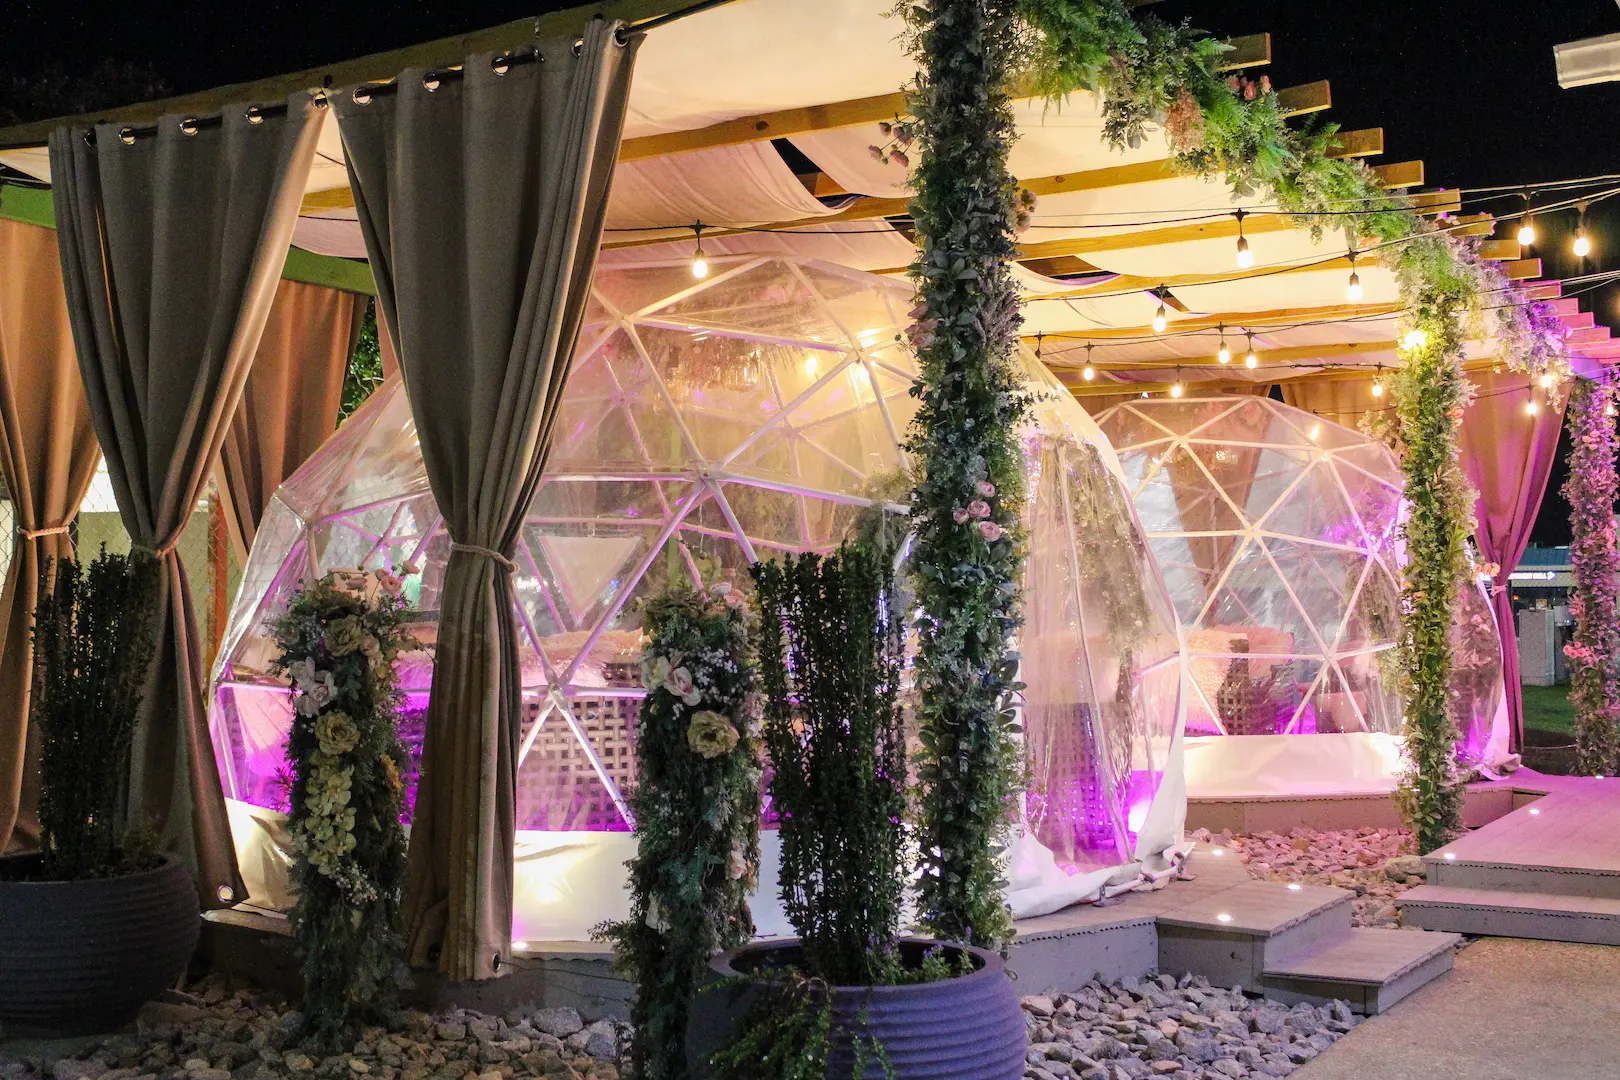 Two igloo lounges outside of The Sweet Spot at night with pink lights.